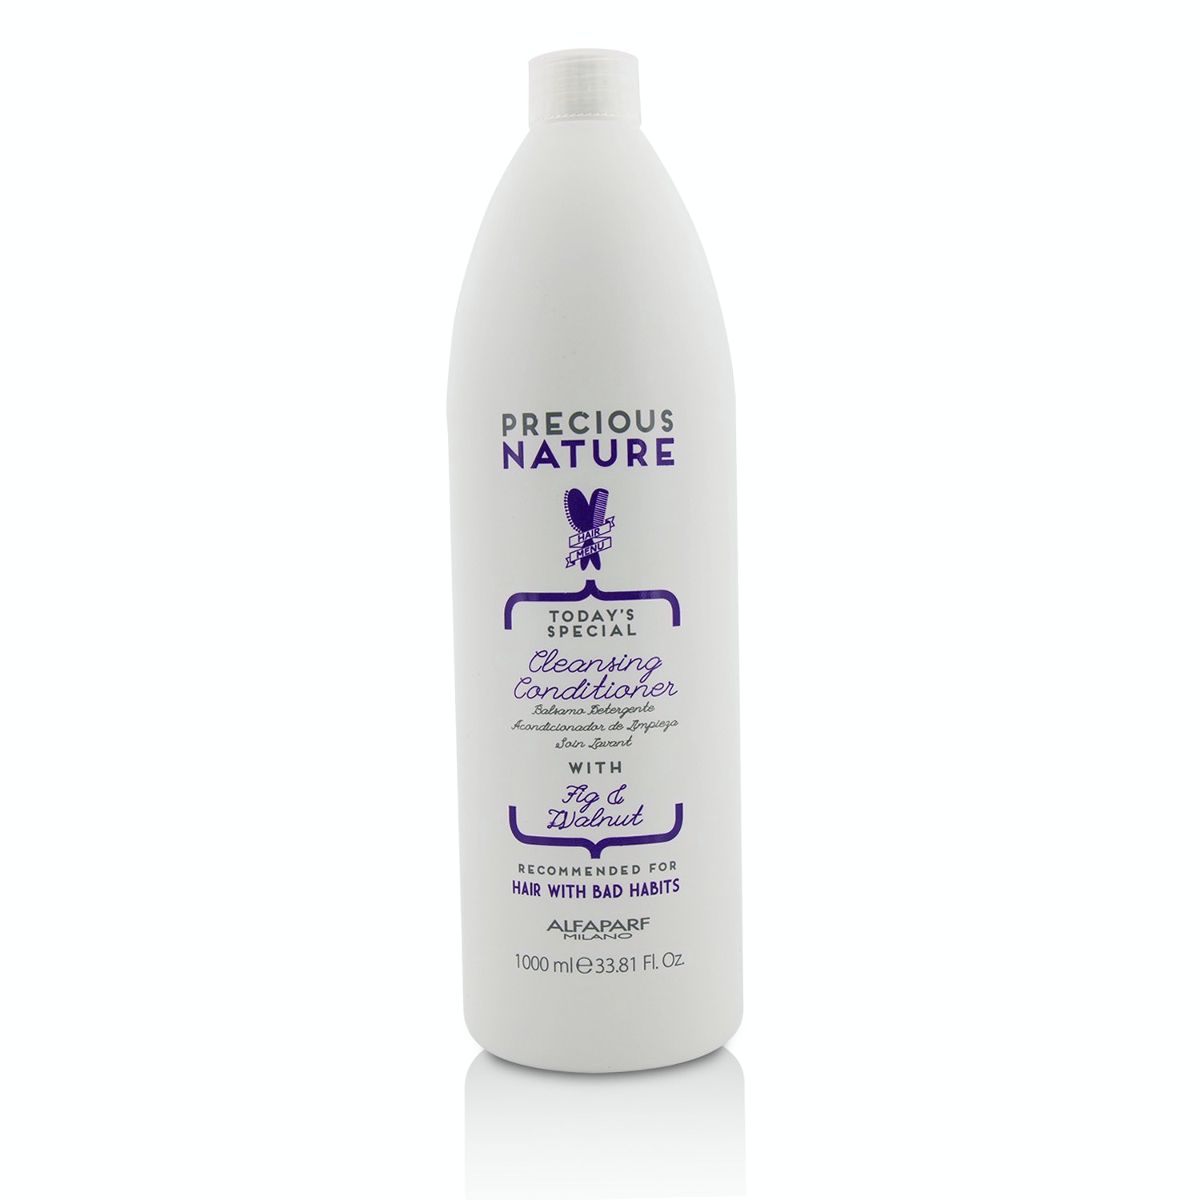 Precious Nature Todays Special Cleansing Conditioner (For Hair with Bad Habits) AlfaParf Image